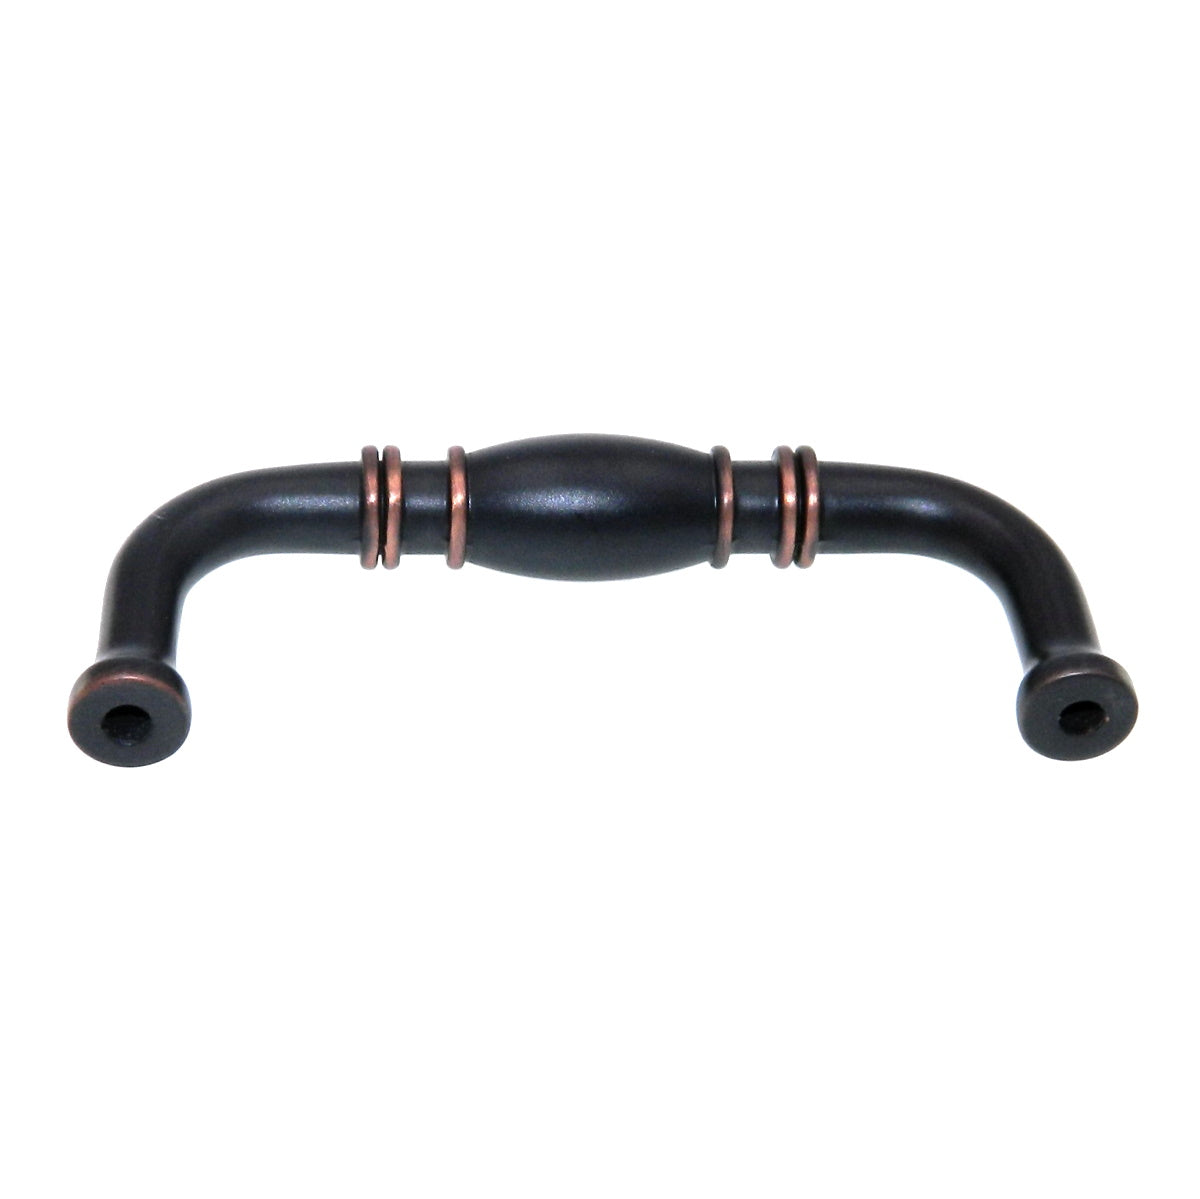 Amerock Granby Oil-Rubbed Bronze 3" Ctr. Cabinet Arch Pull Handle BP53013-ORB